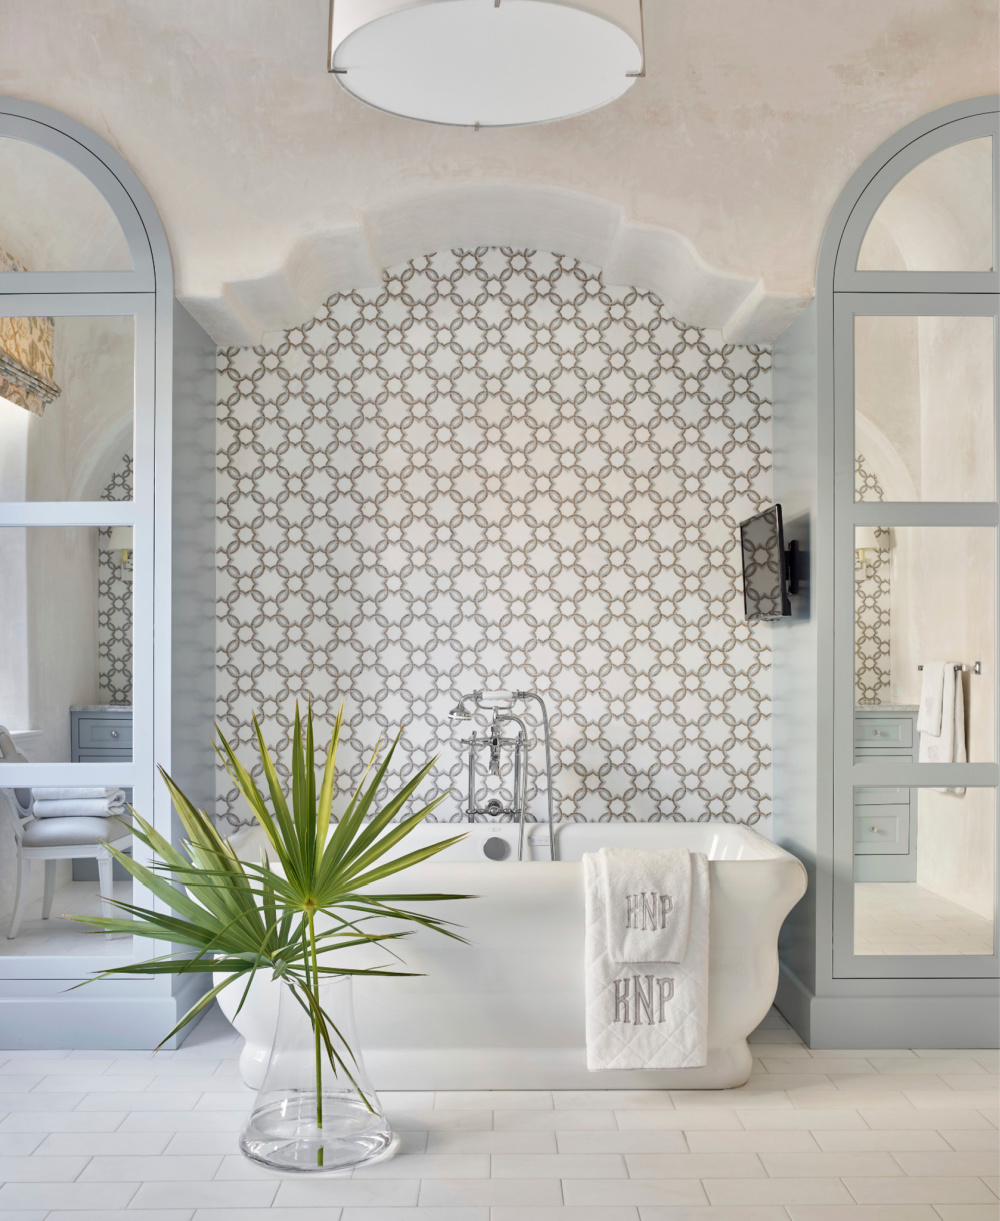 Sophisticated and classic bathroom designed by Suzanne Kasler in EDITED STYLE (Rizzoli, 2022).